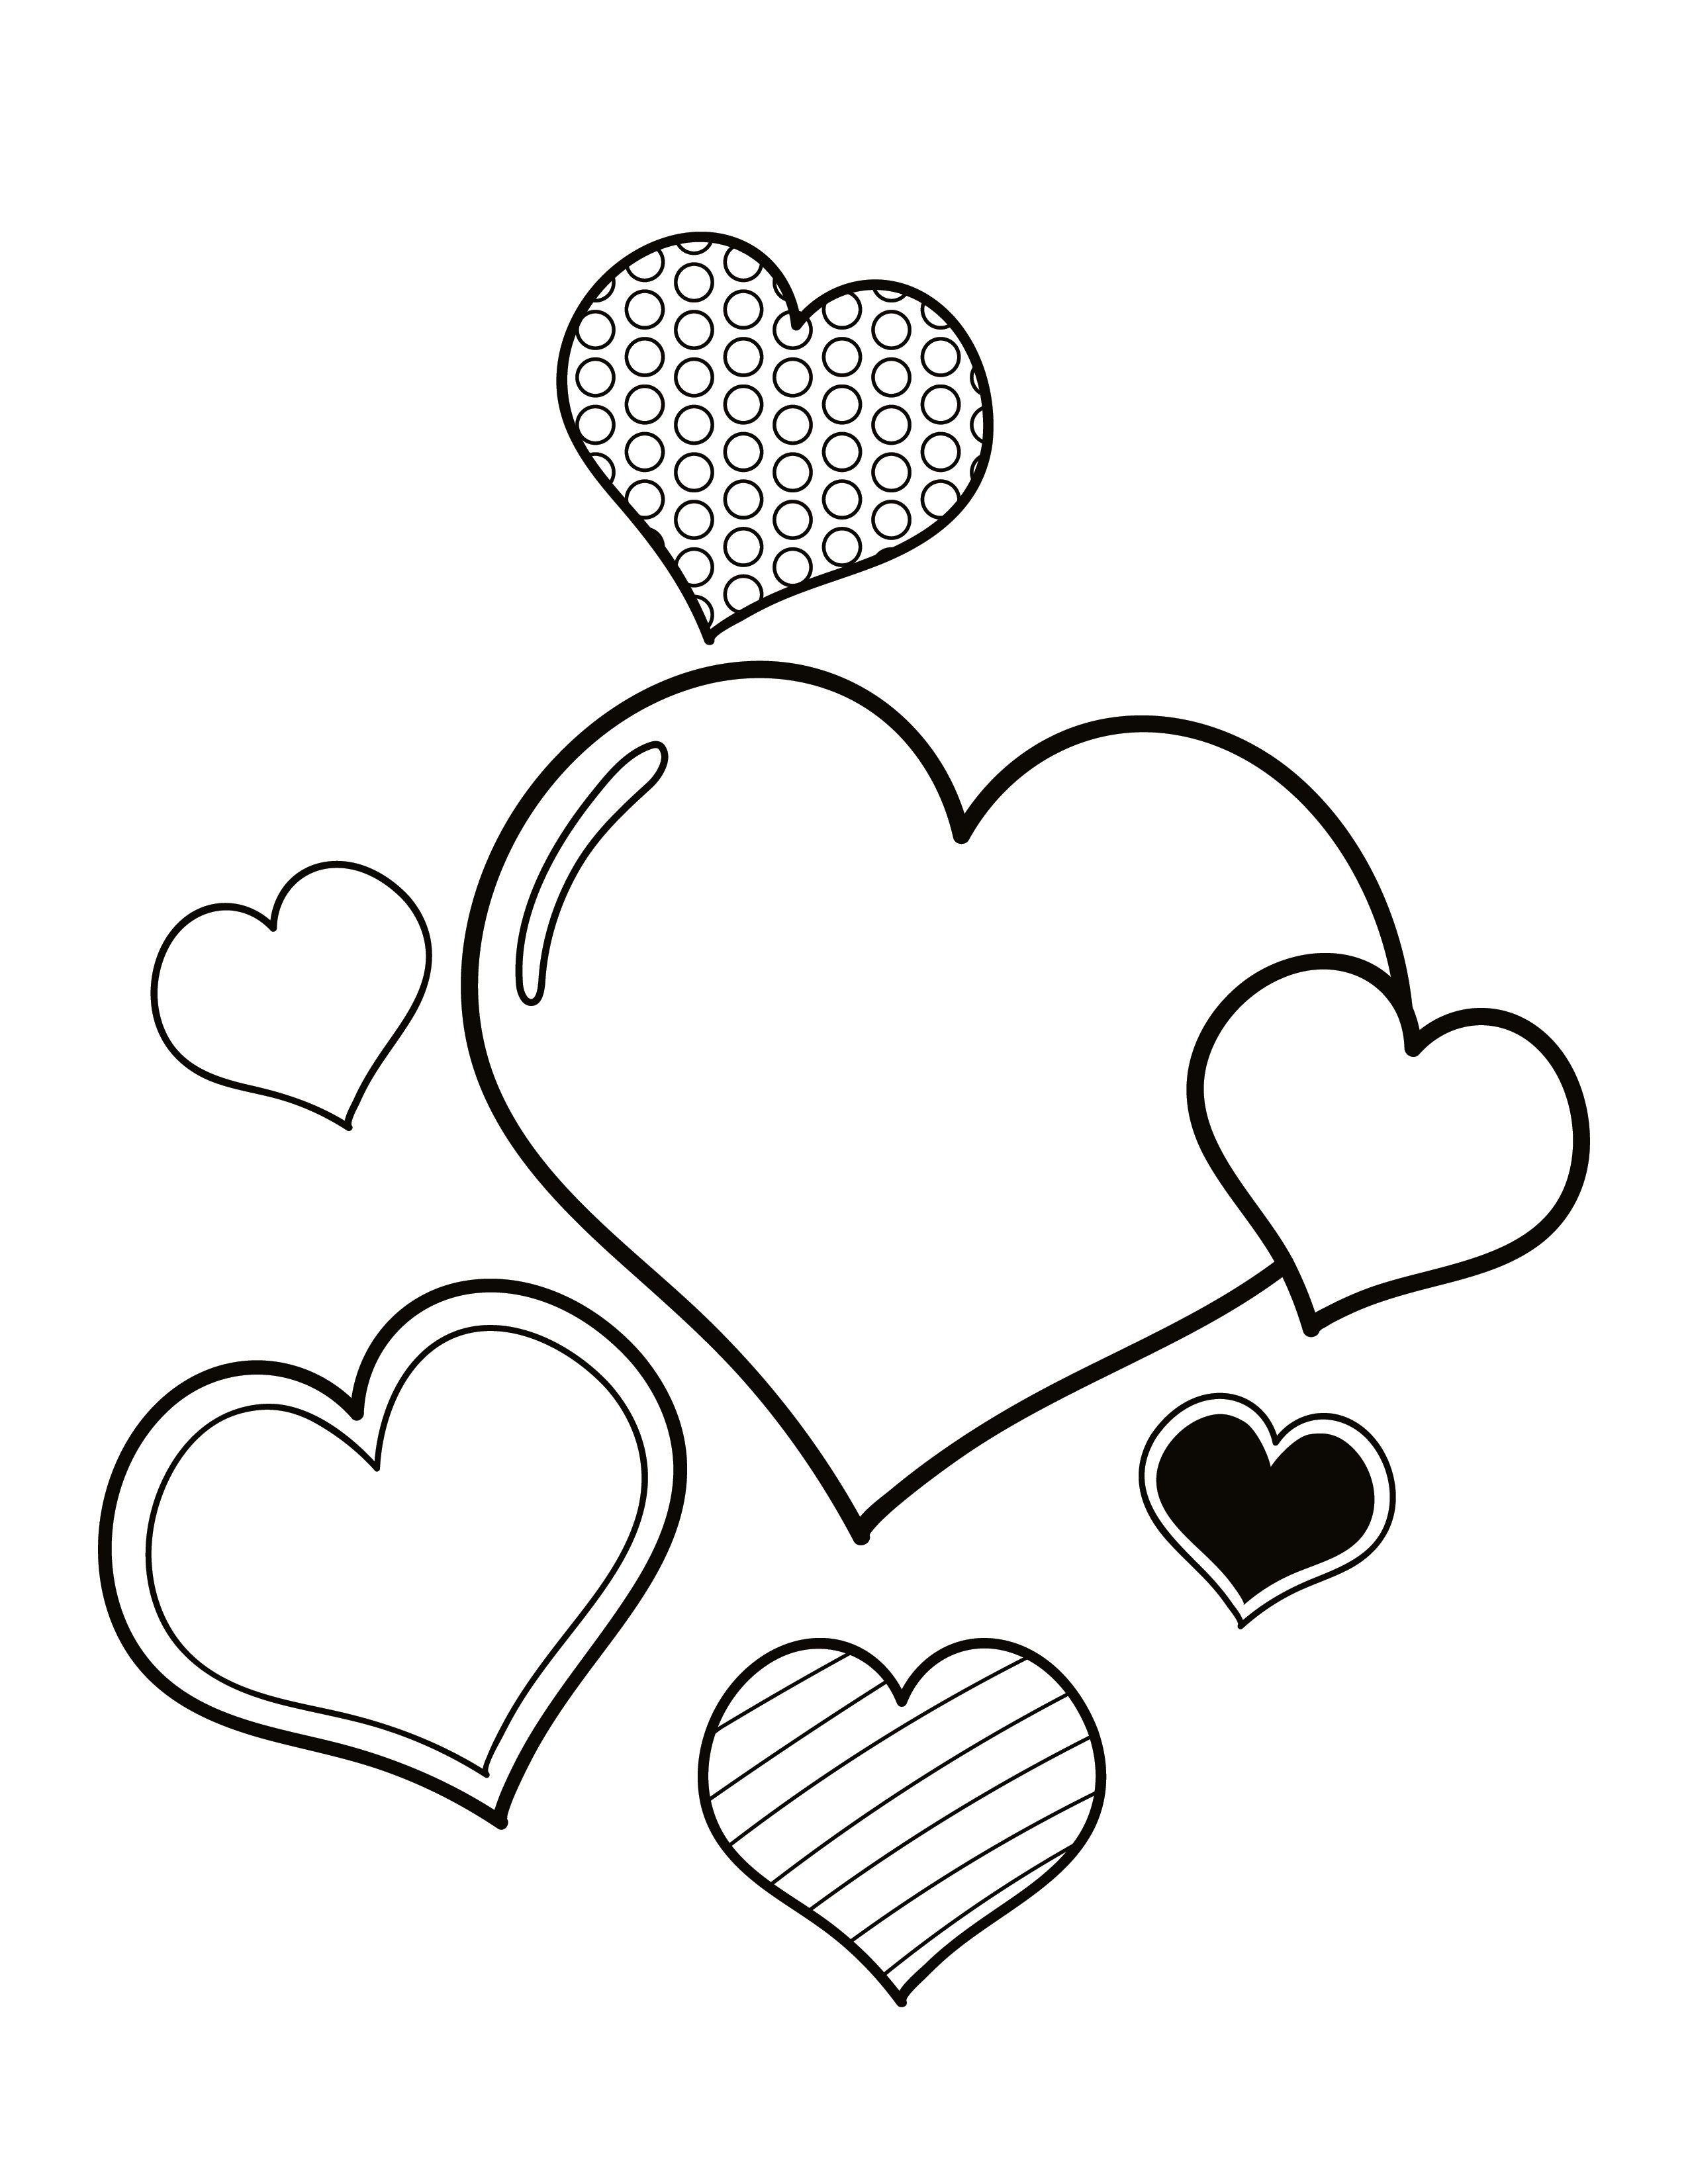 Free Heart Coloring Page Eps Illustrator Jpg Png Pdf Svg Template Net